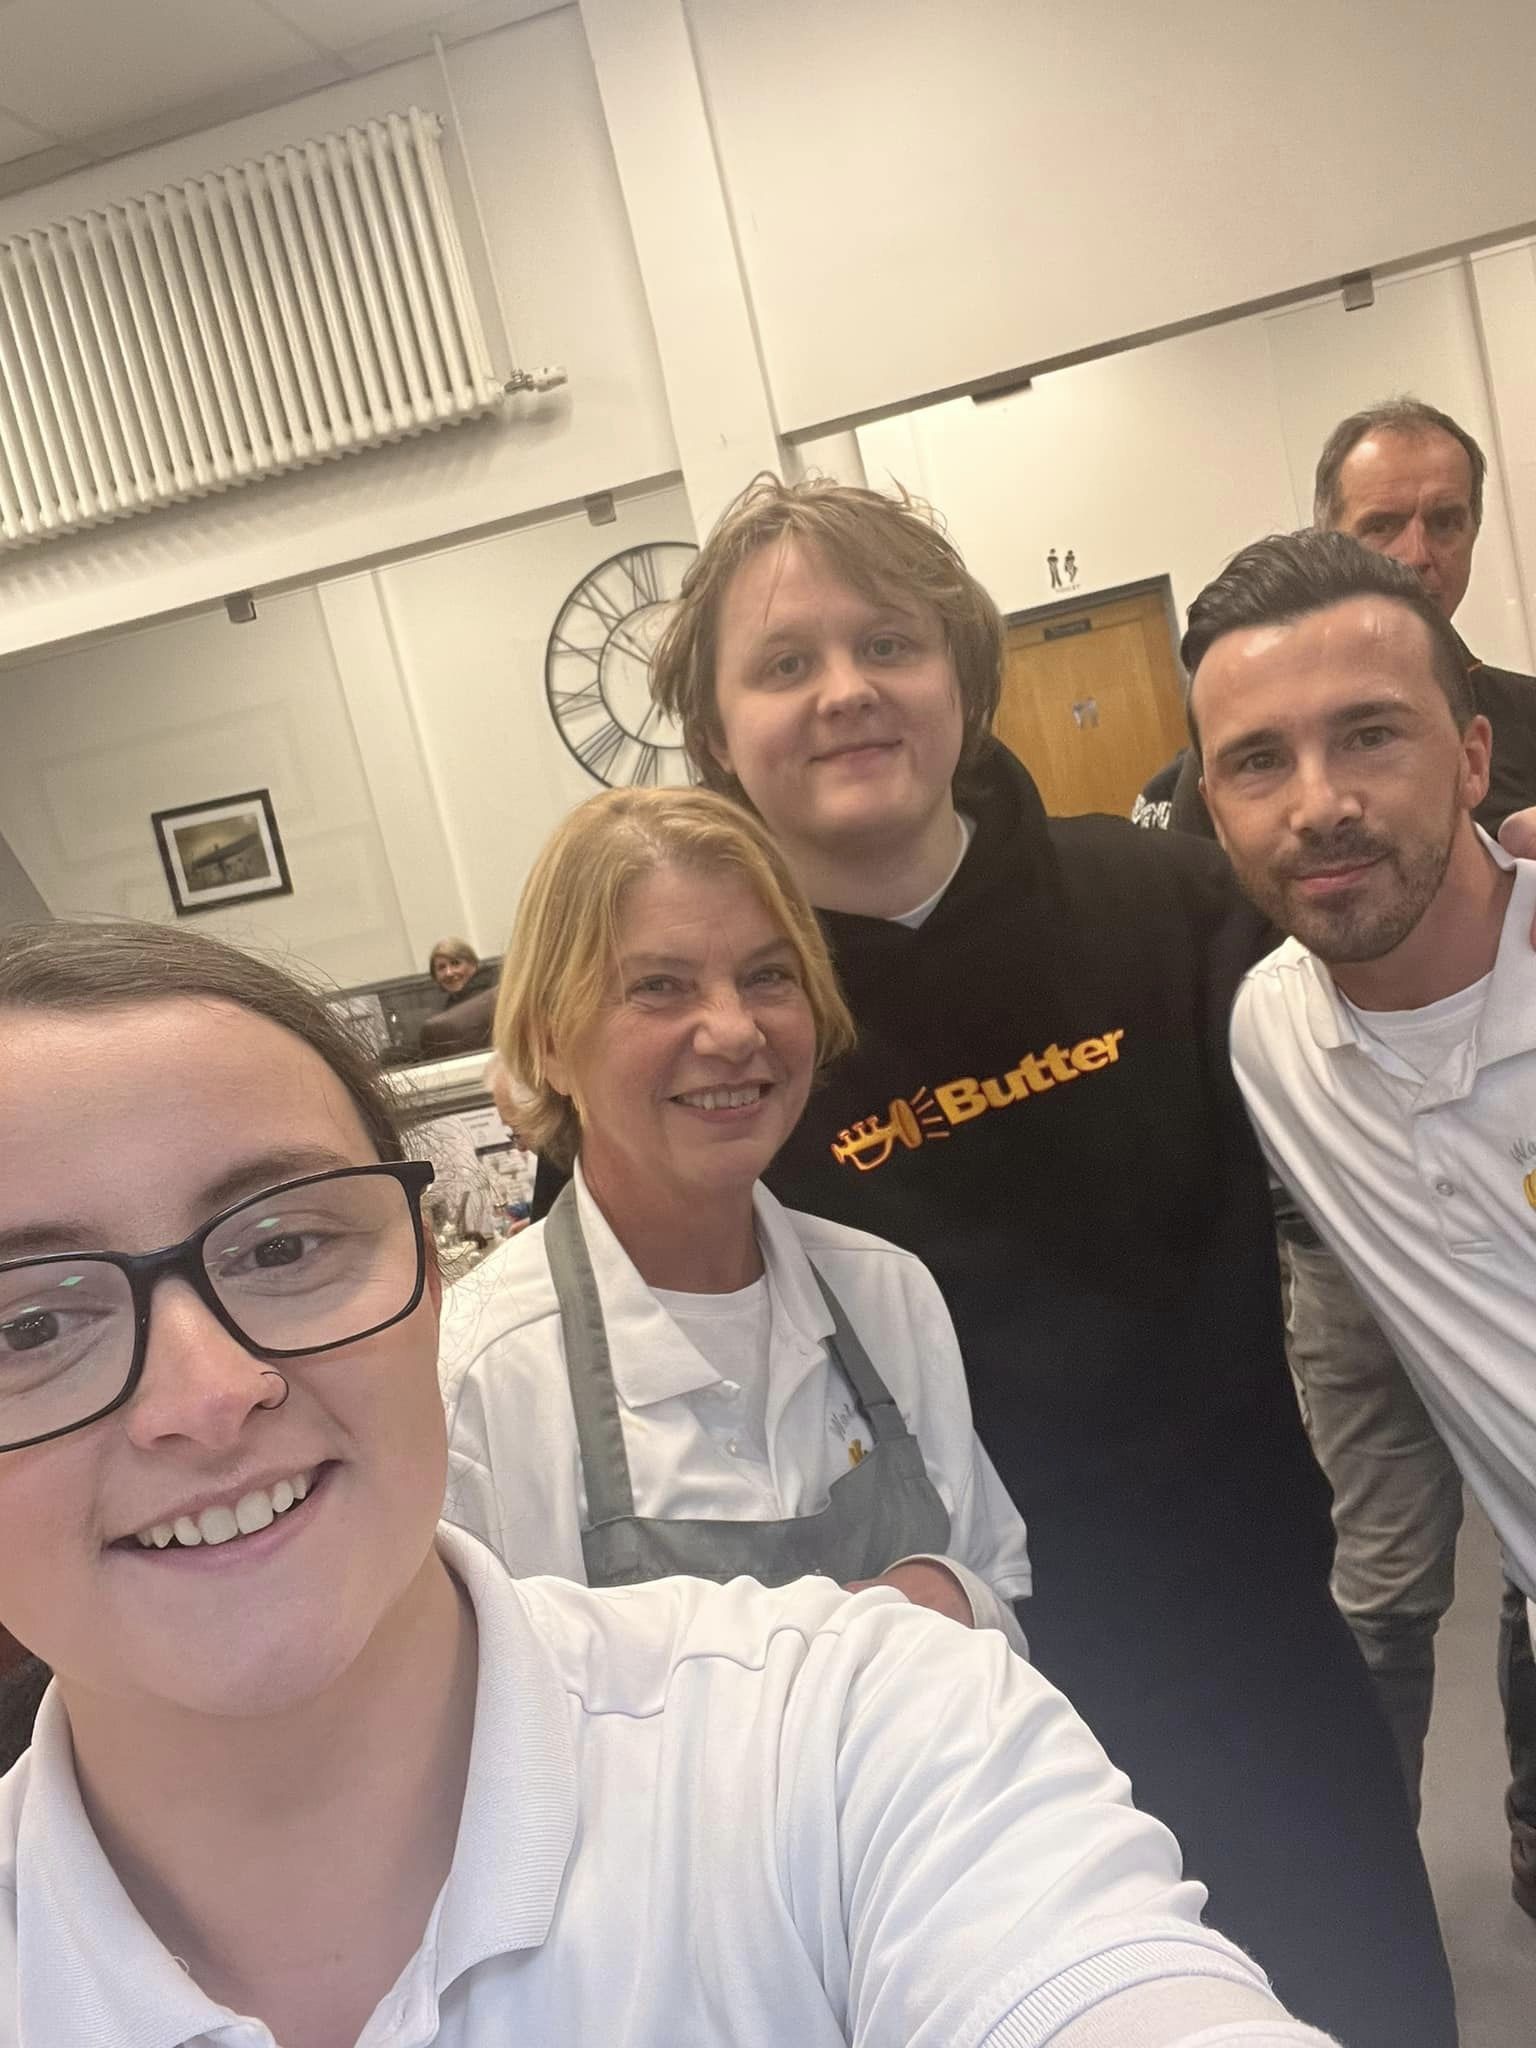 Staff at The Waterfront fish and chip shop in North Shields pose for photo with Lewis Capaldi.